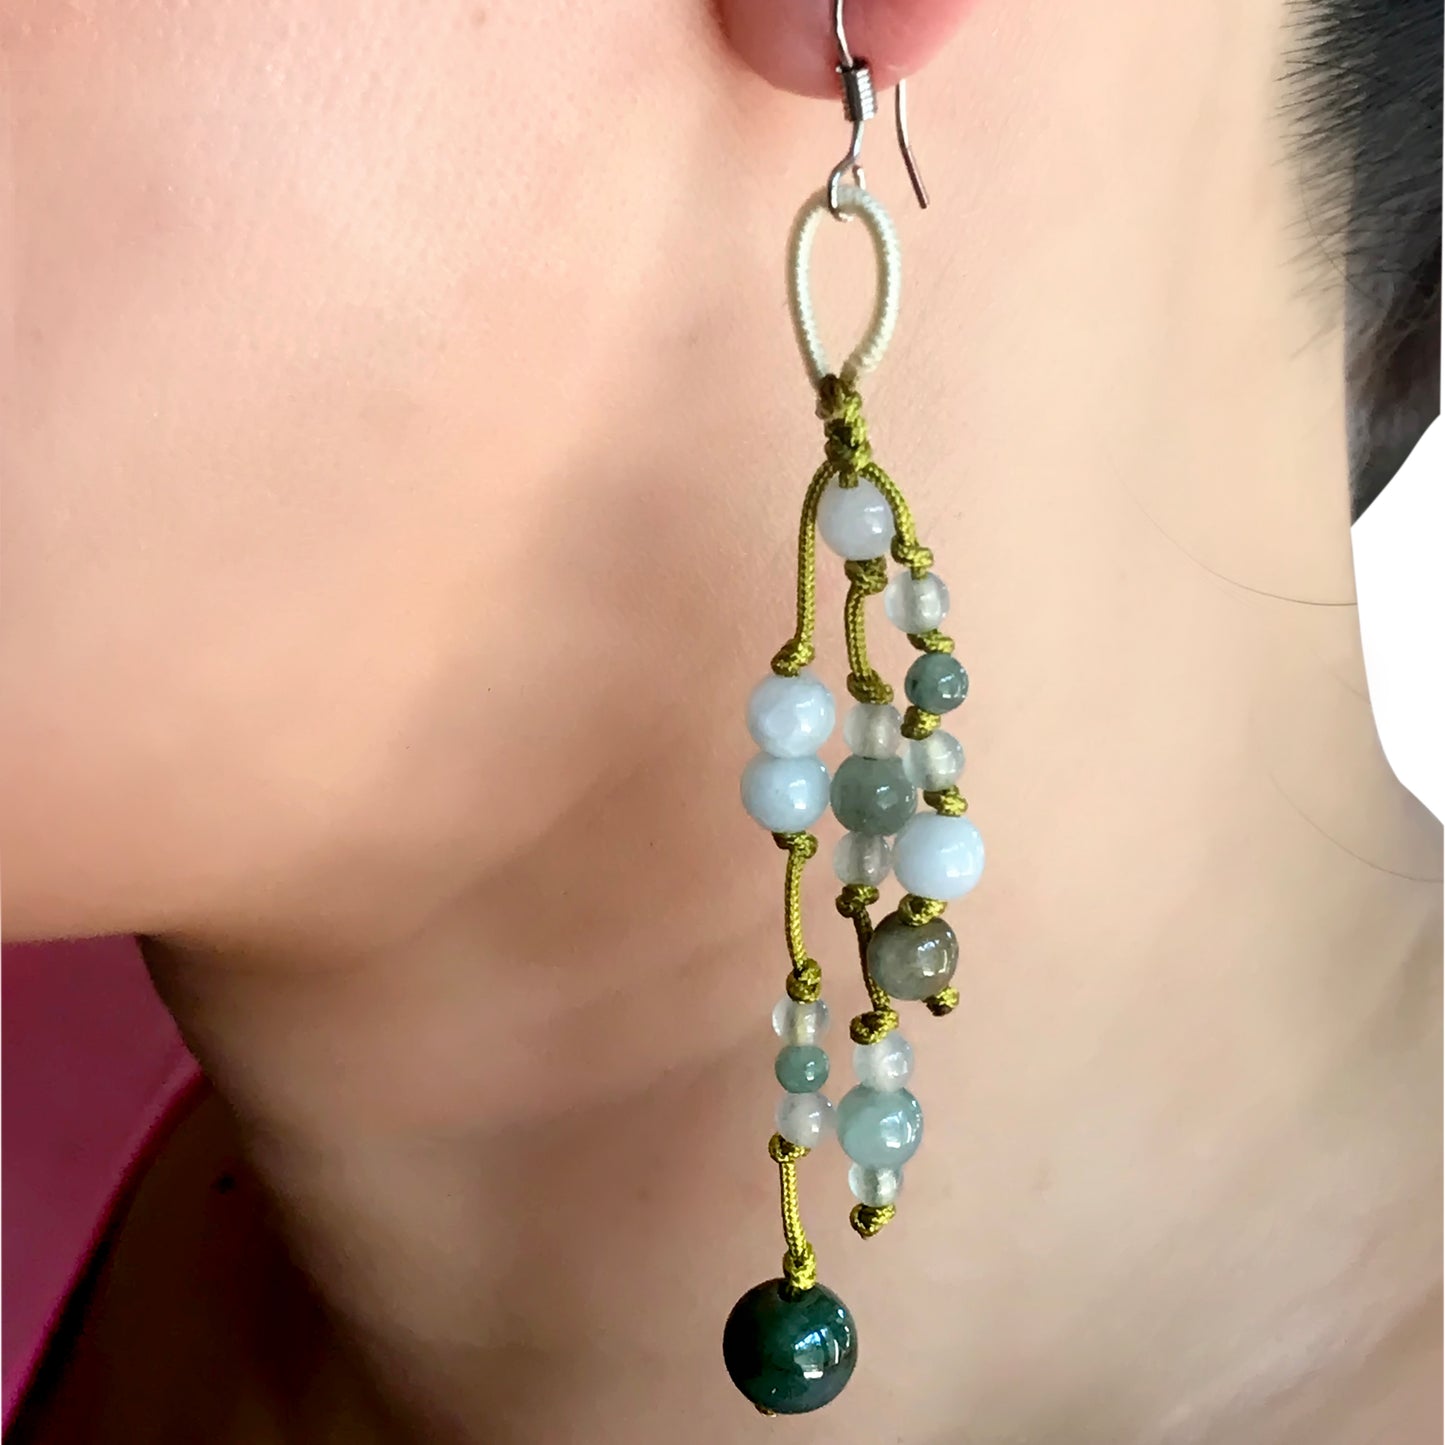 Add Some Colors and Dangle with this Breathtaking Jade Beads Earrings made with Lime Cord